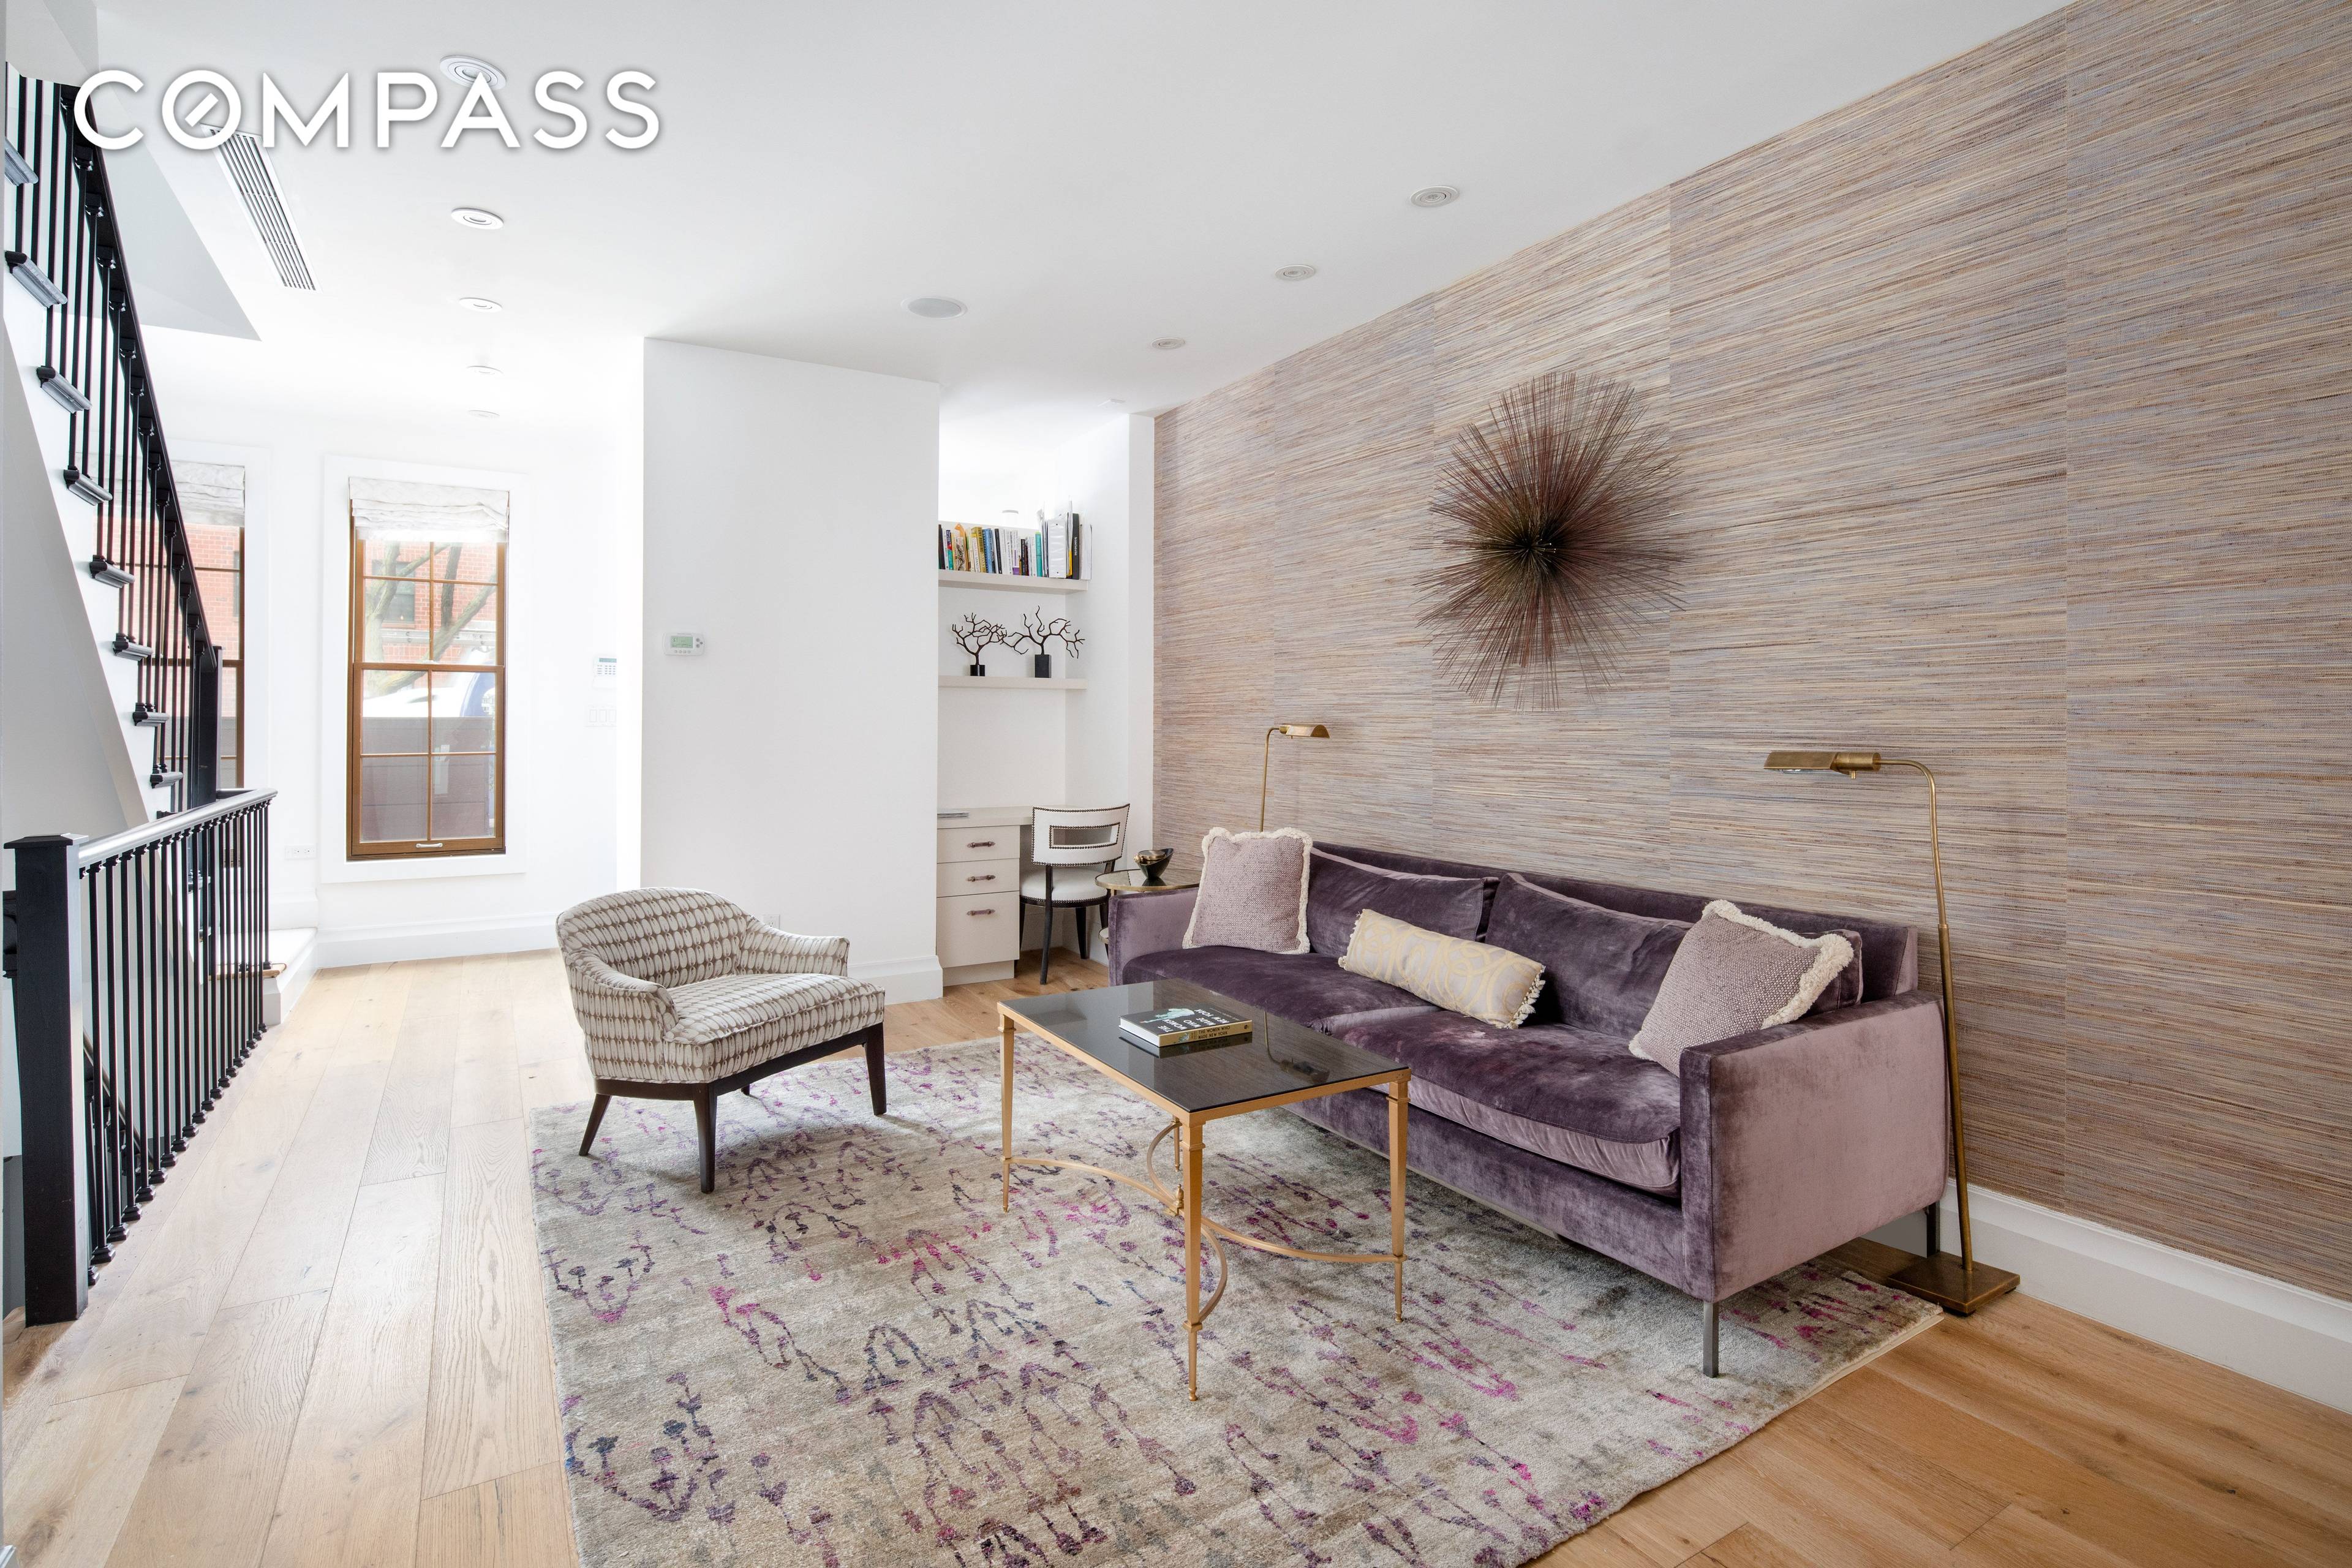 Welcome to 465 Vanderbilt ave in Clinton Hill.